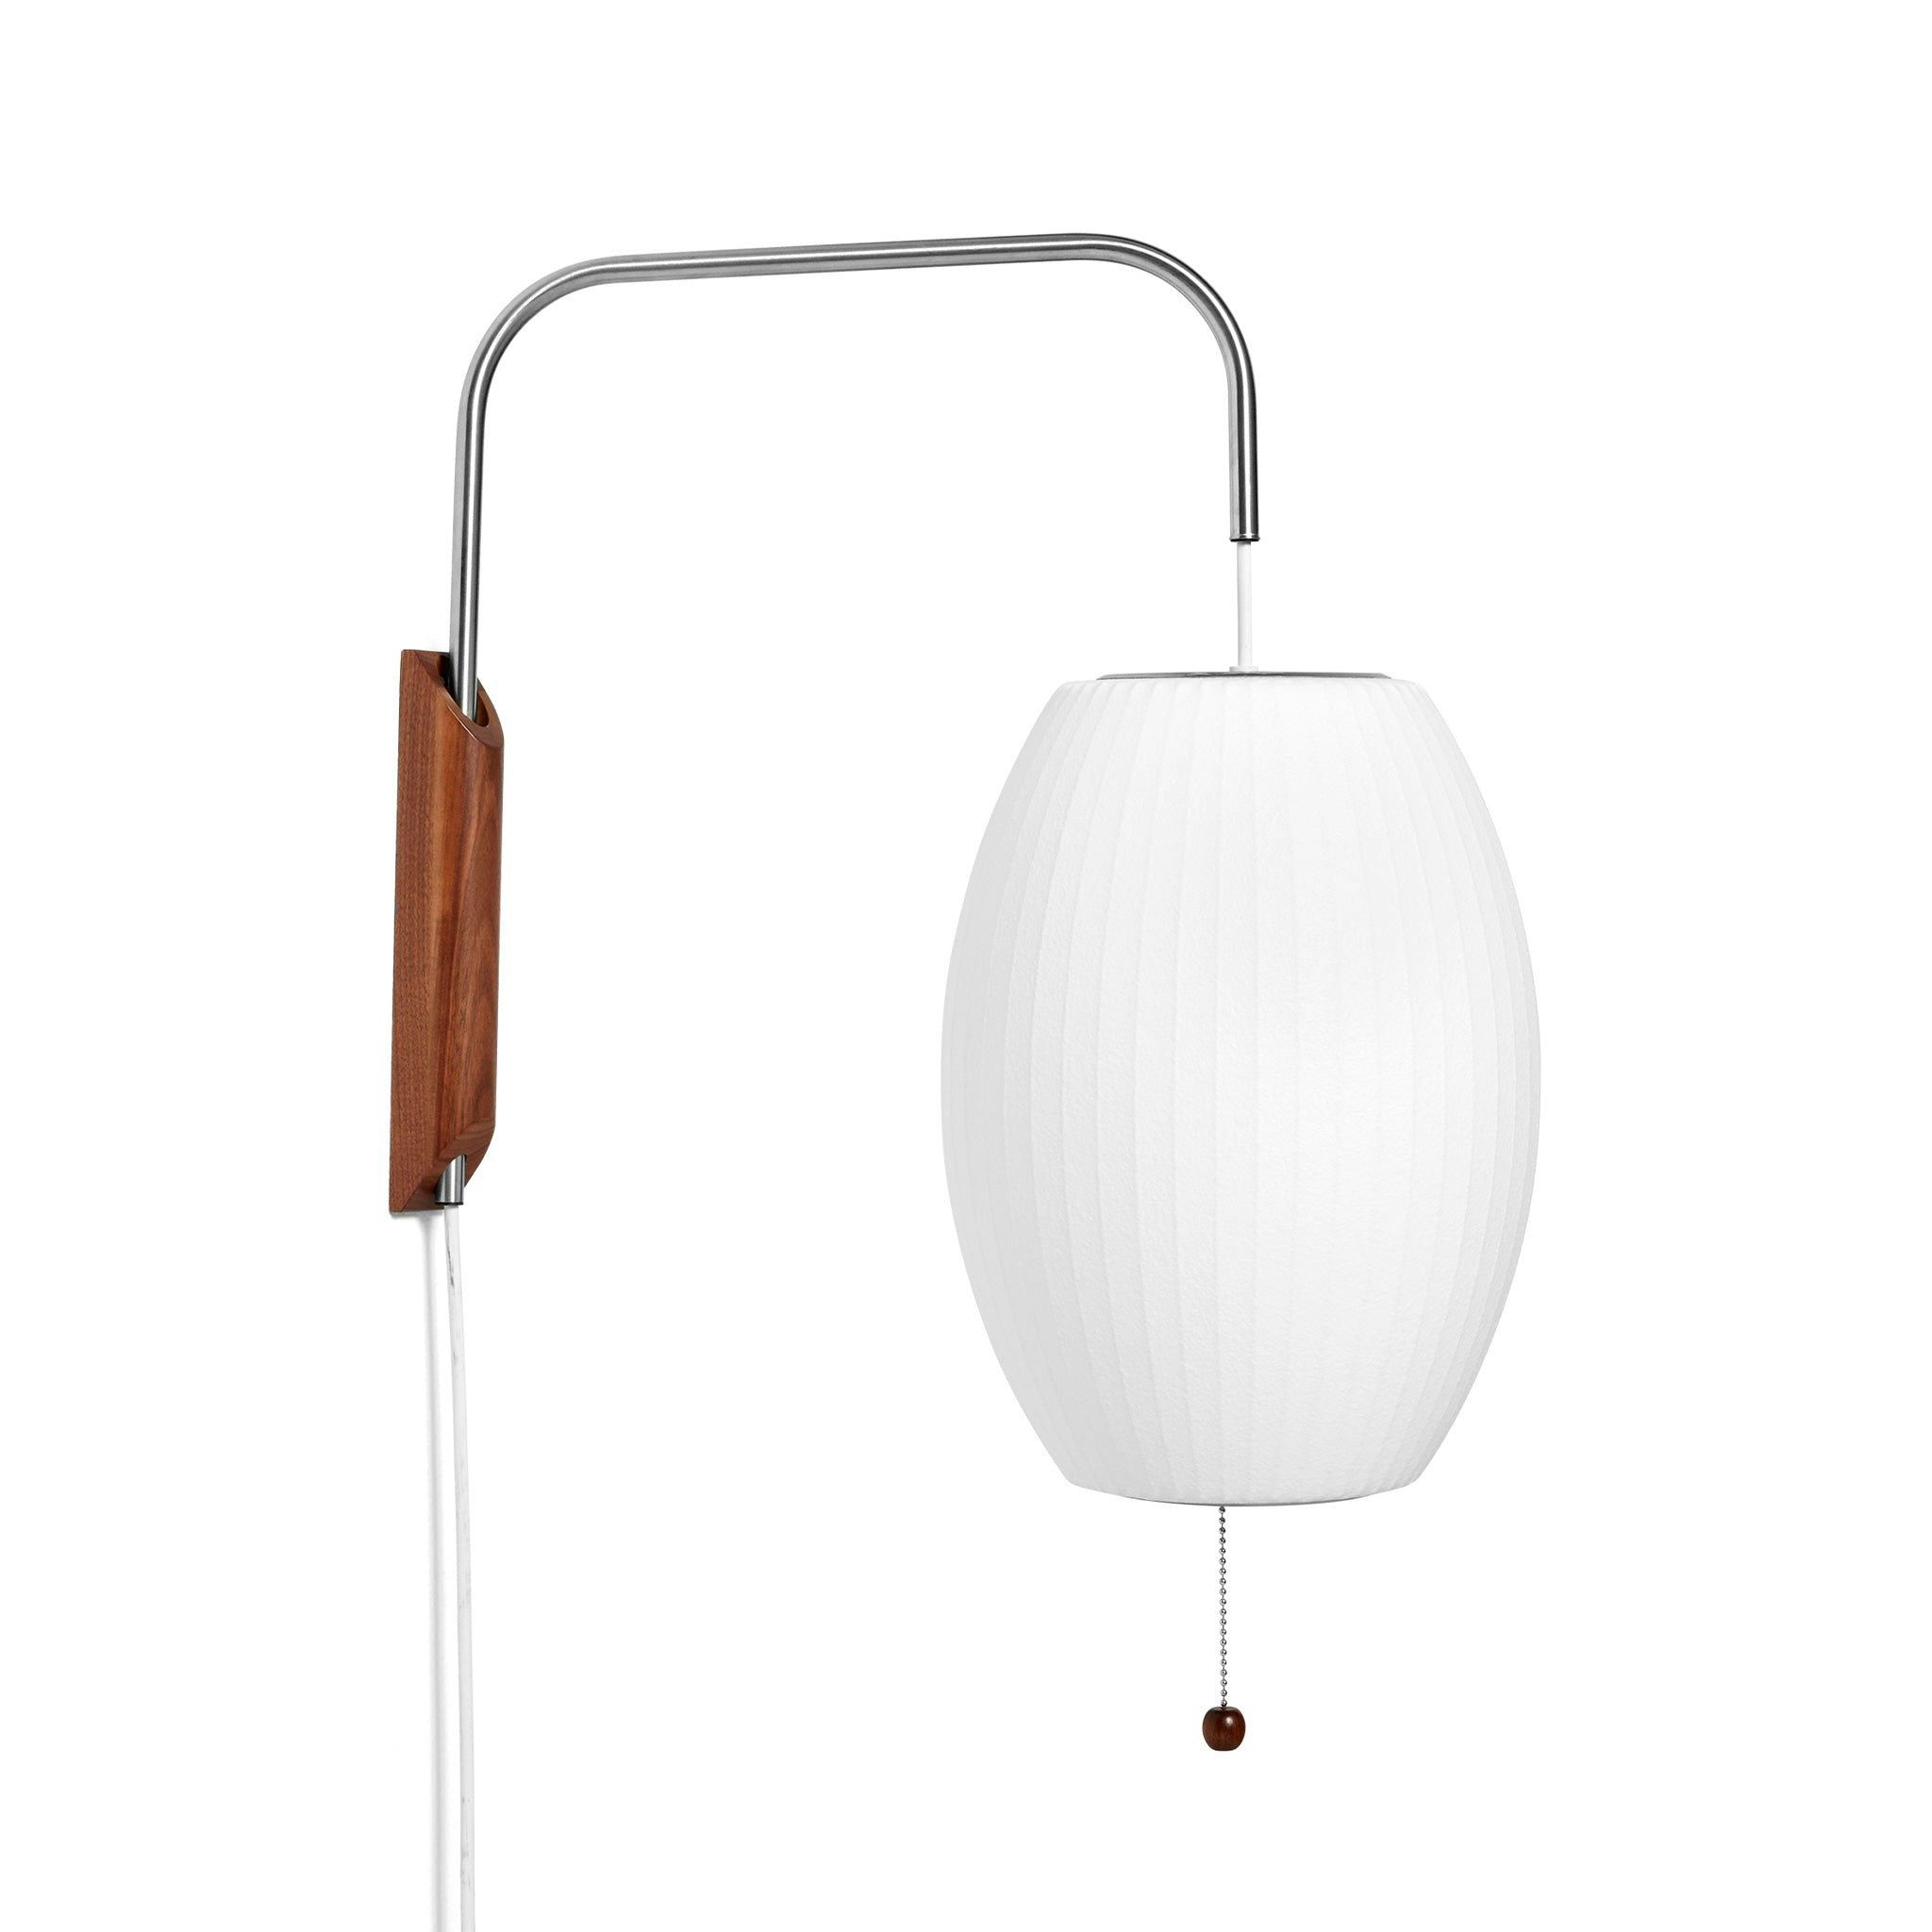 Nelson Cigar Wall Sconce Cabled by Herman Miller for Hay